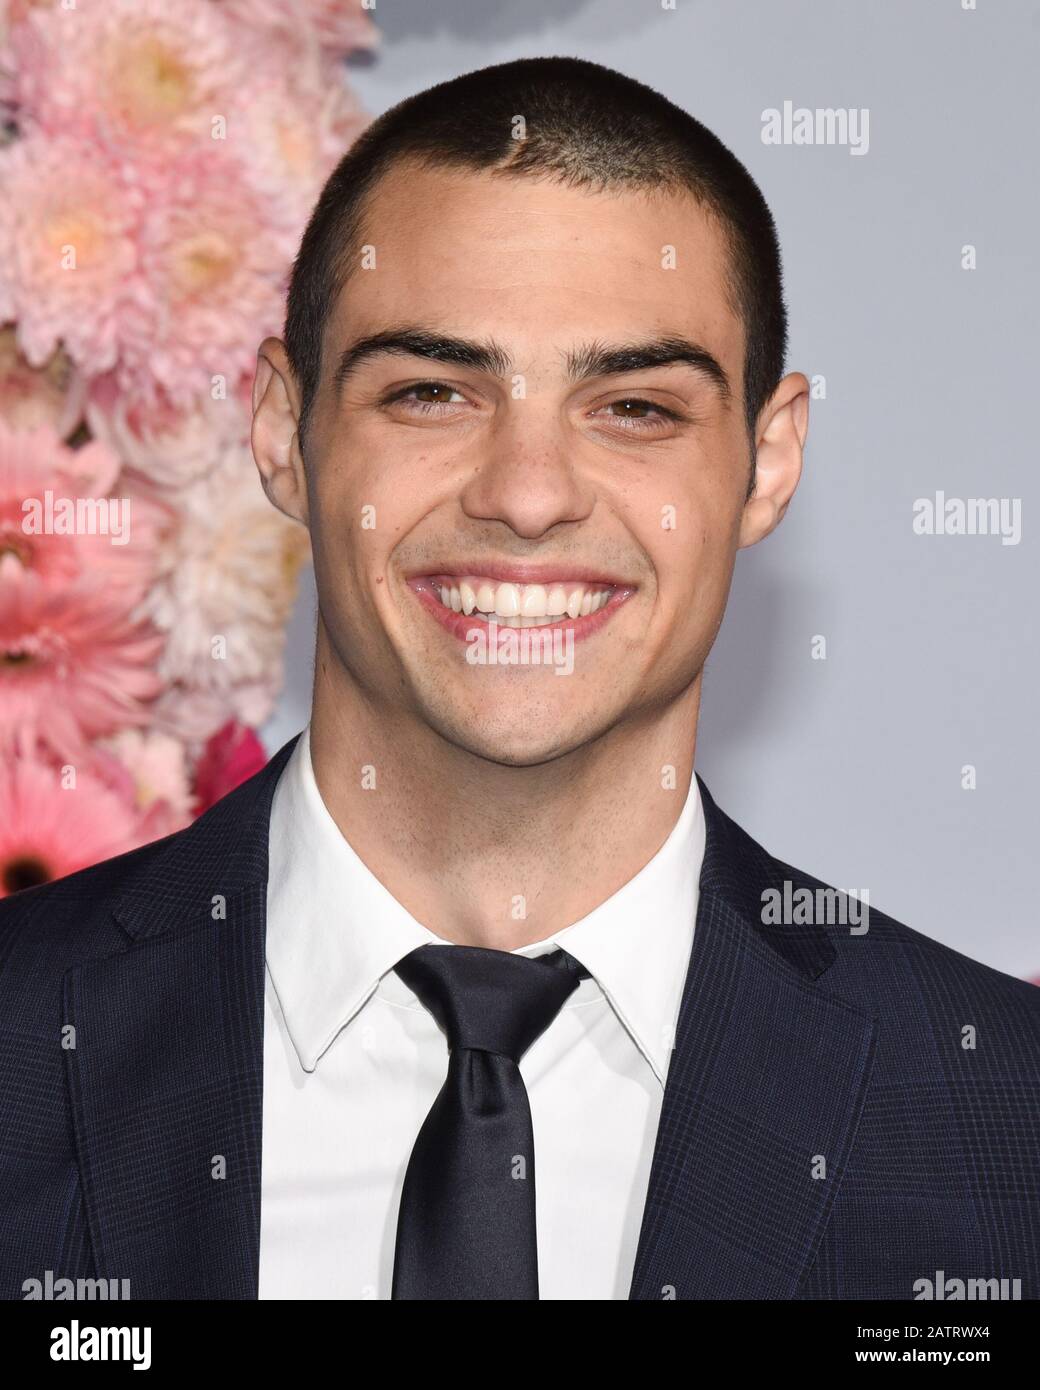 February 3, 2020, Los Angeles, CA, USA: Noah Centineo attends Premiere Of Netflix's ''To All The Boys: P.S. I Still Love You'' at The Egyptian Theatre. (Credit Image: © Billy Bennight/ZUMA Wire) Stock Photo